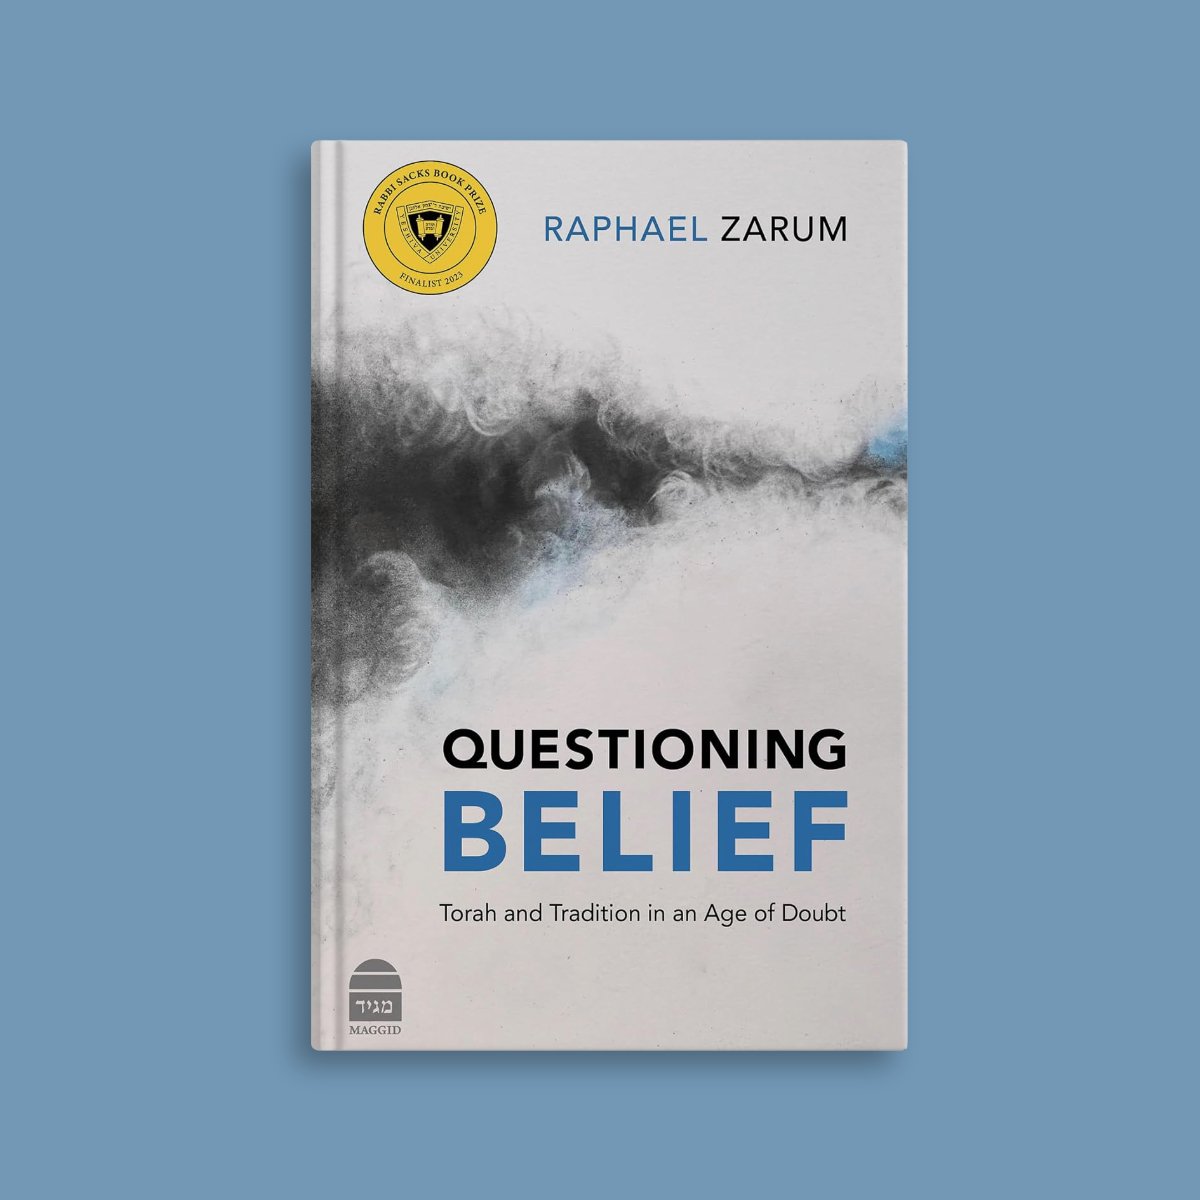 &quot;I raid rabbinic texts for novel interpretations that breathe new life and meaning into Judaism&quot; &ndash; Rabbi Dr @RaphaelZarum expands on the whys and wherefores behind his new book, Questioning Belief (@KorenPublishers), ahead of his JR Z